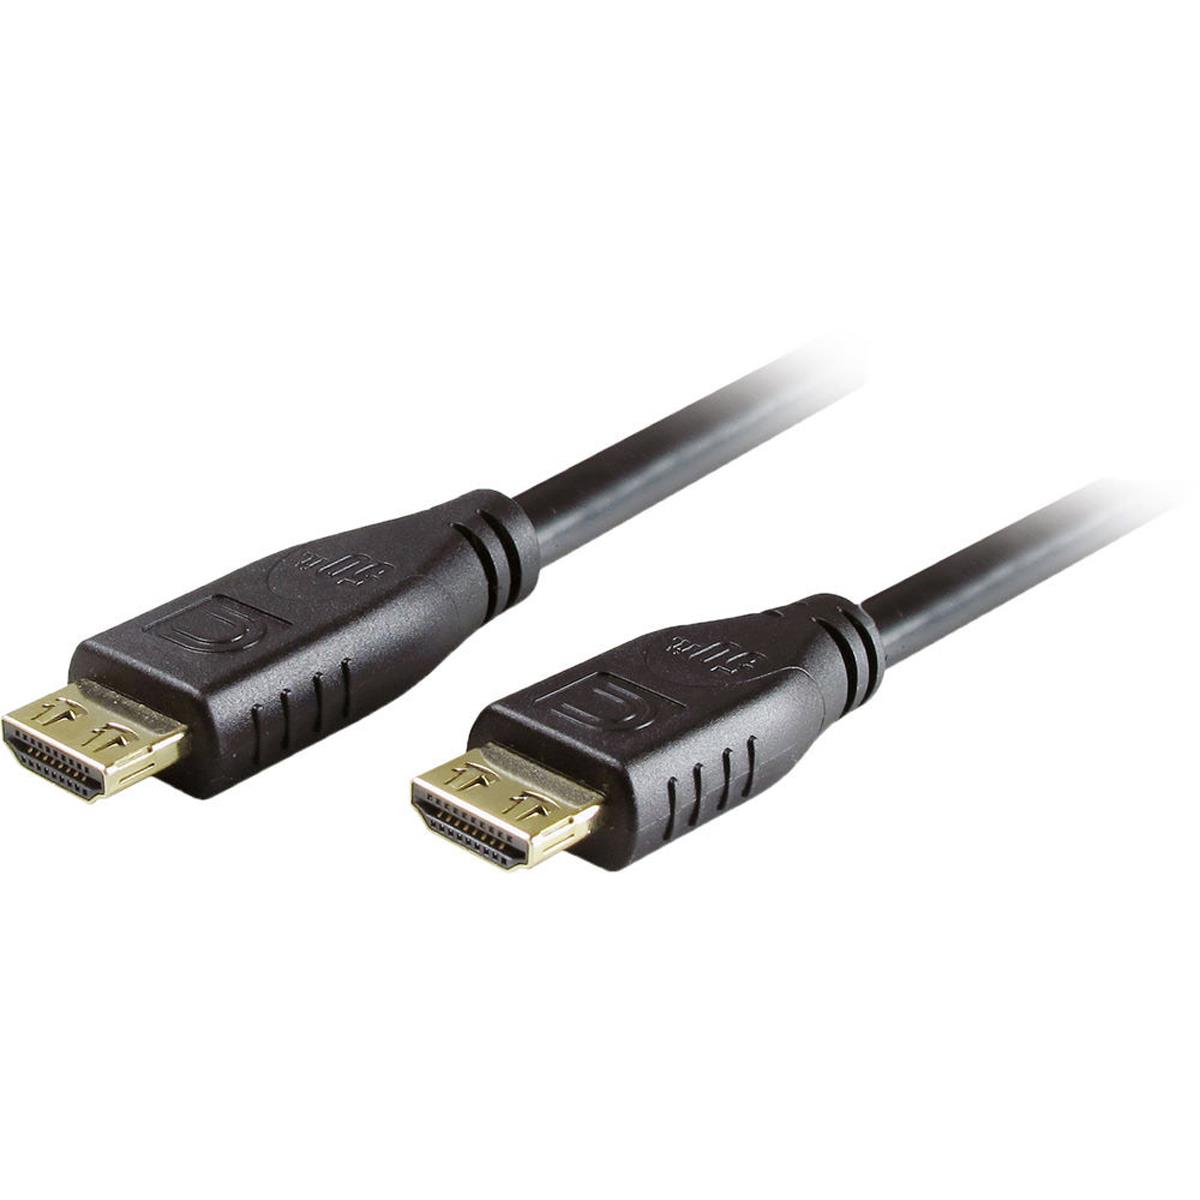 Image of Comprehensive MicroFlex Active Pro AV/IT 10.2G HDMI to HDMI Cable